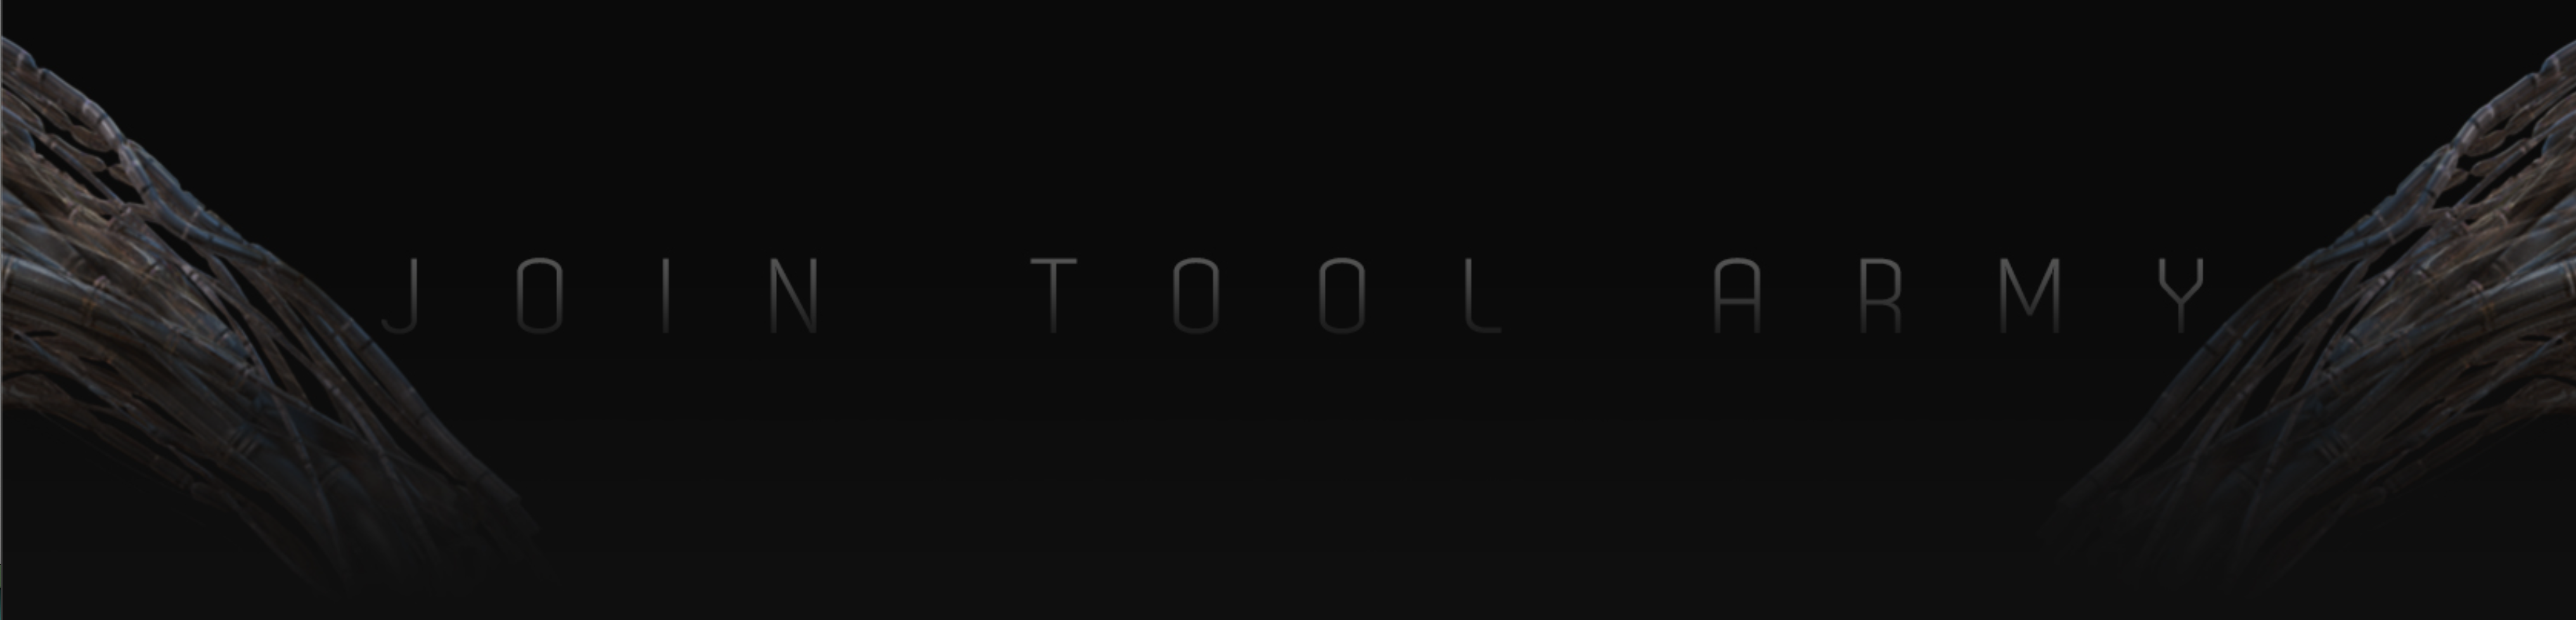 How to Use Tool Presale Codes So You Can Score Concert Tickets